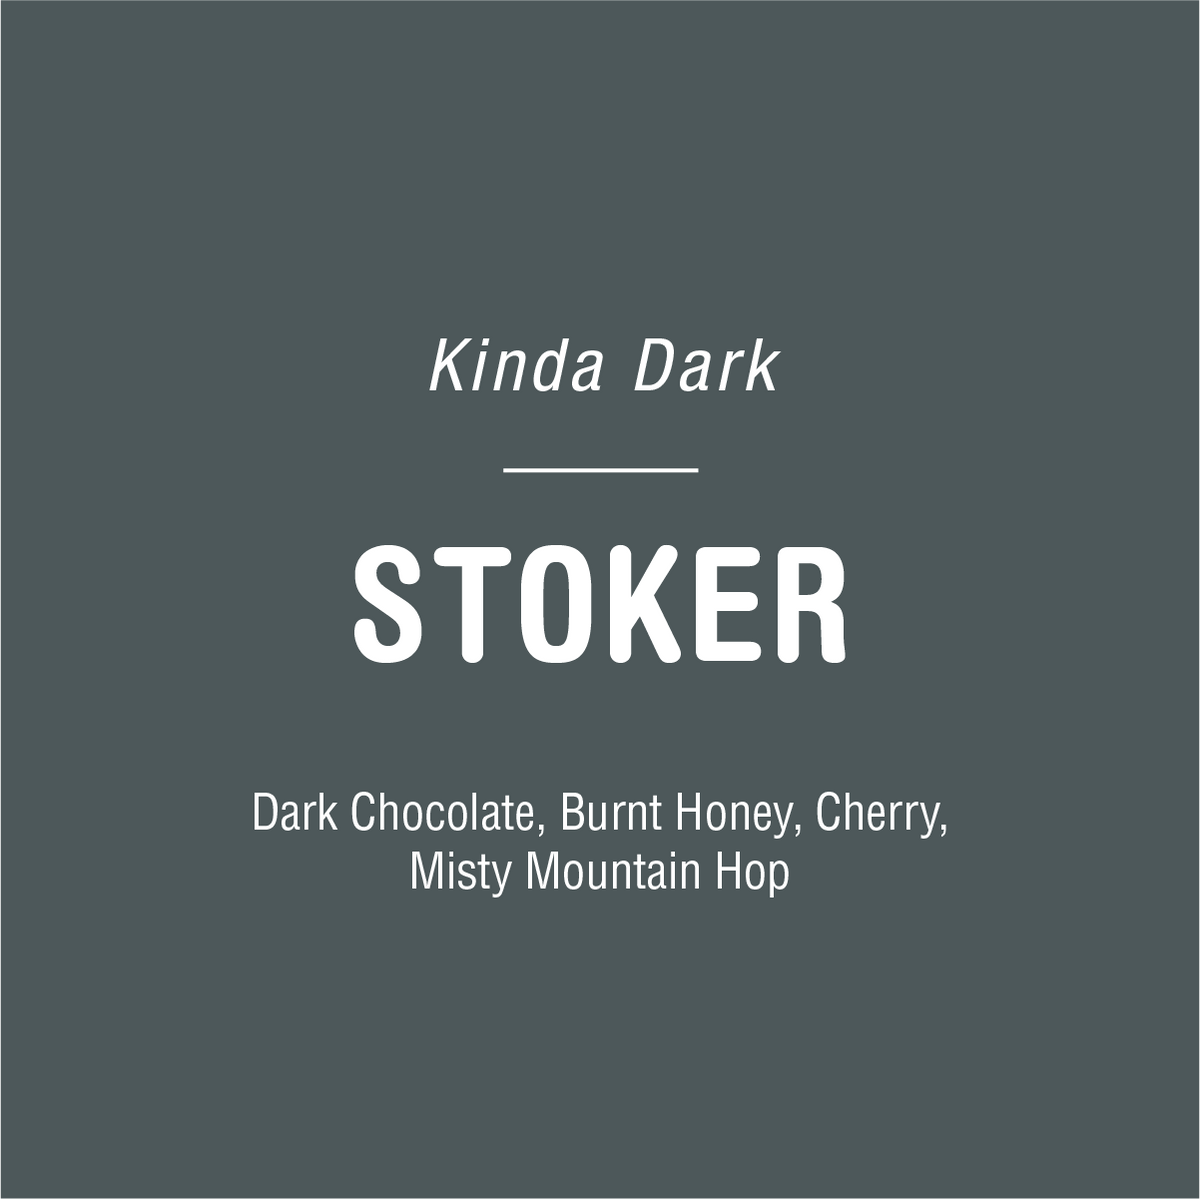 Text on a gray background reads "Kinda Dark roasted coffee, Tandem's roastiness, dark chocolate, burnt honey, cherry, misty mountain hop," suggesting flavors or themes, possibly of a